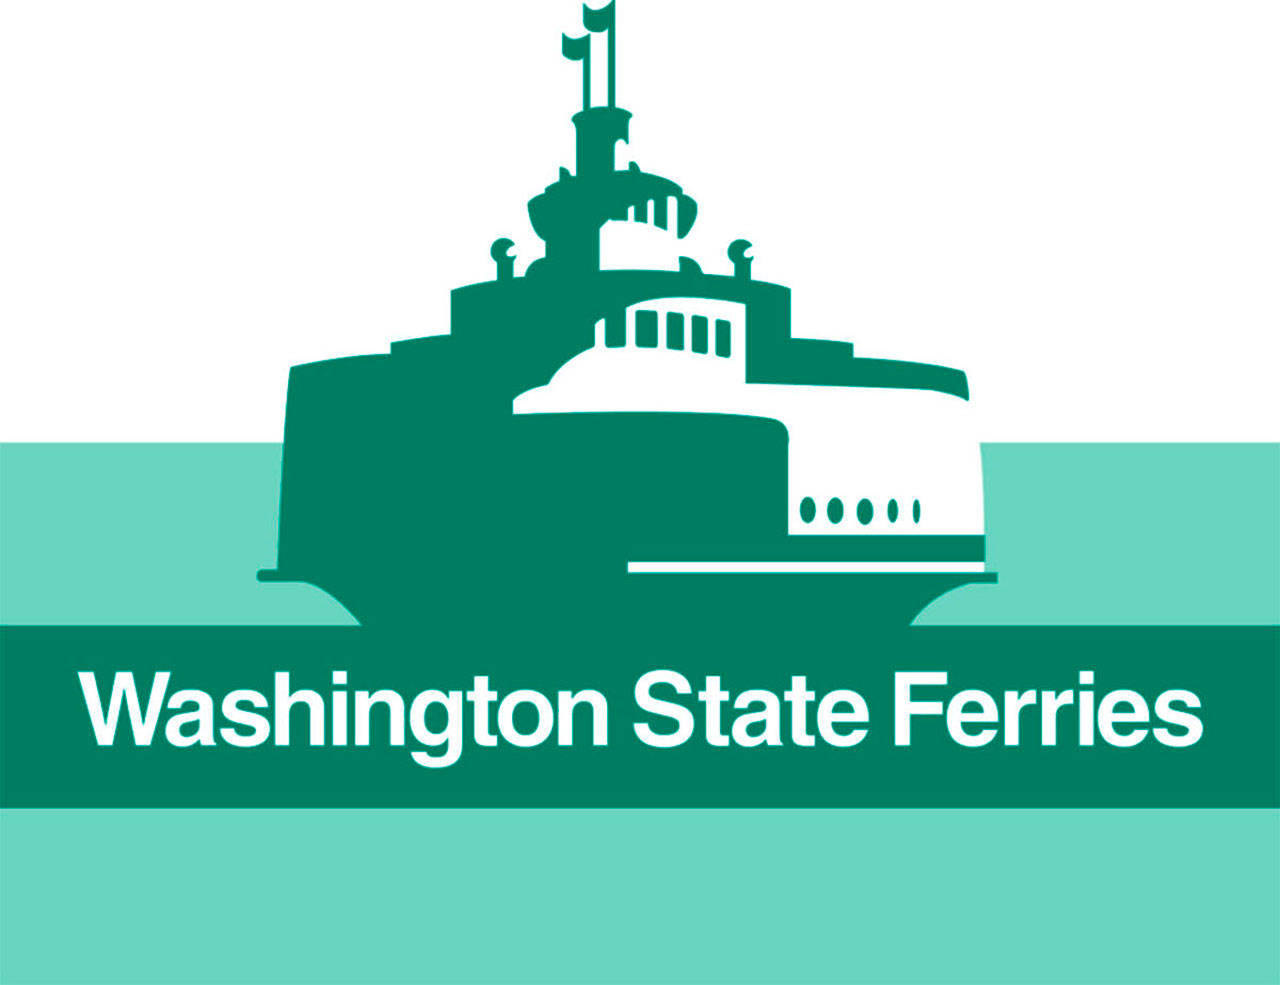 Prepare for busy holiday travel on Washington State Ferries